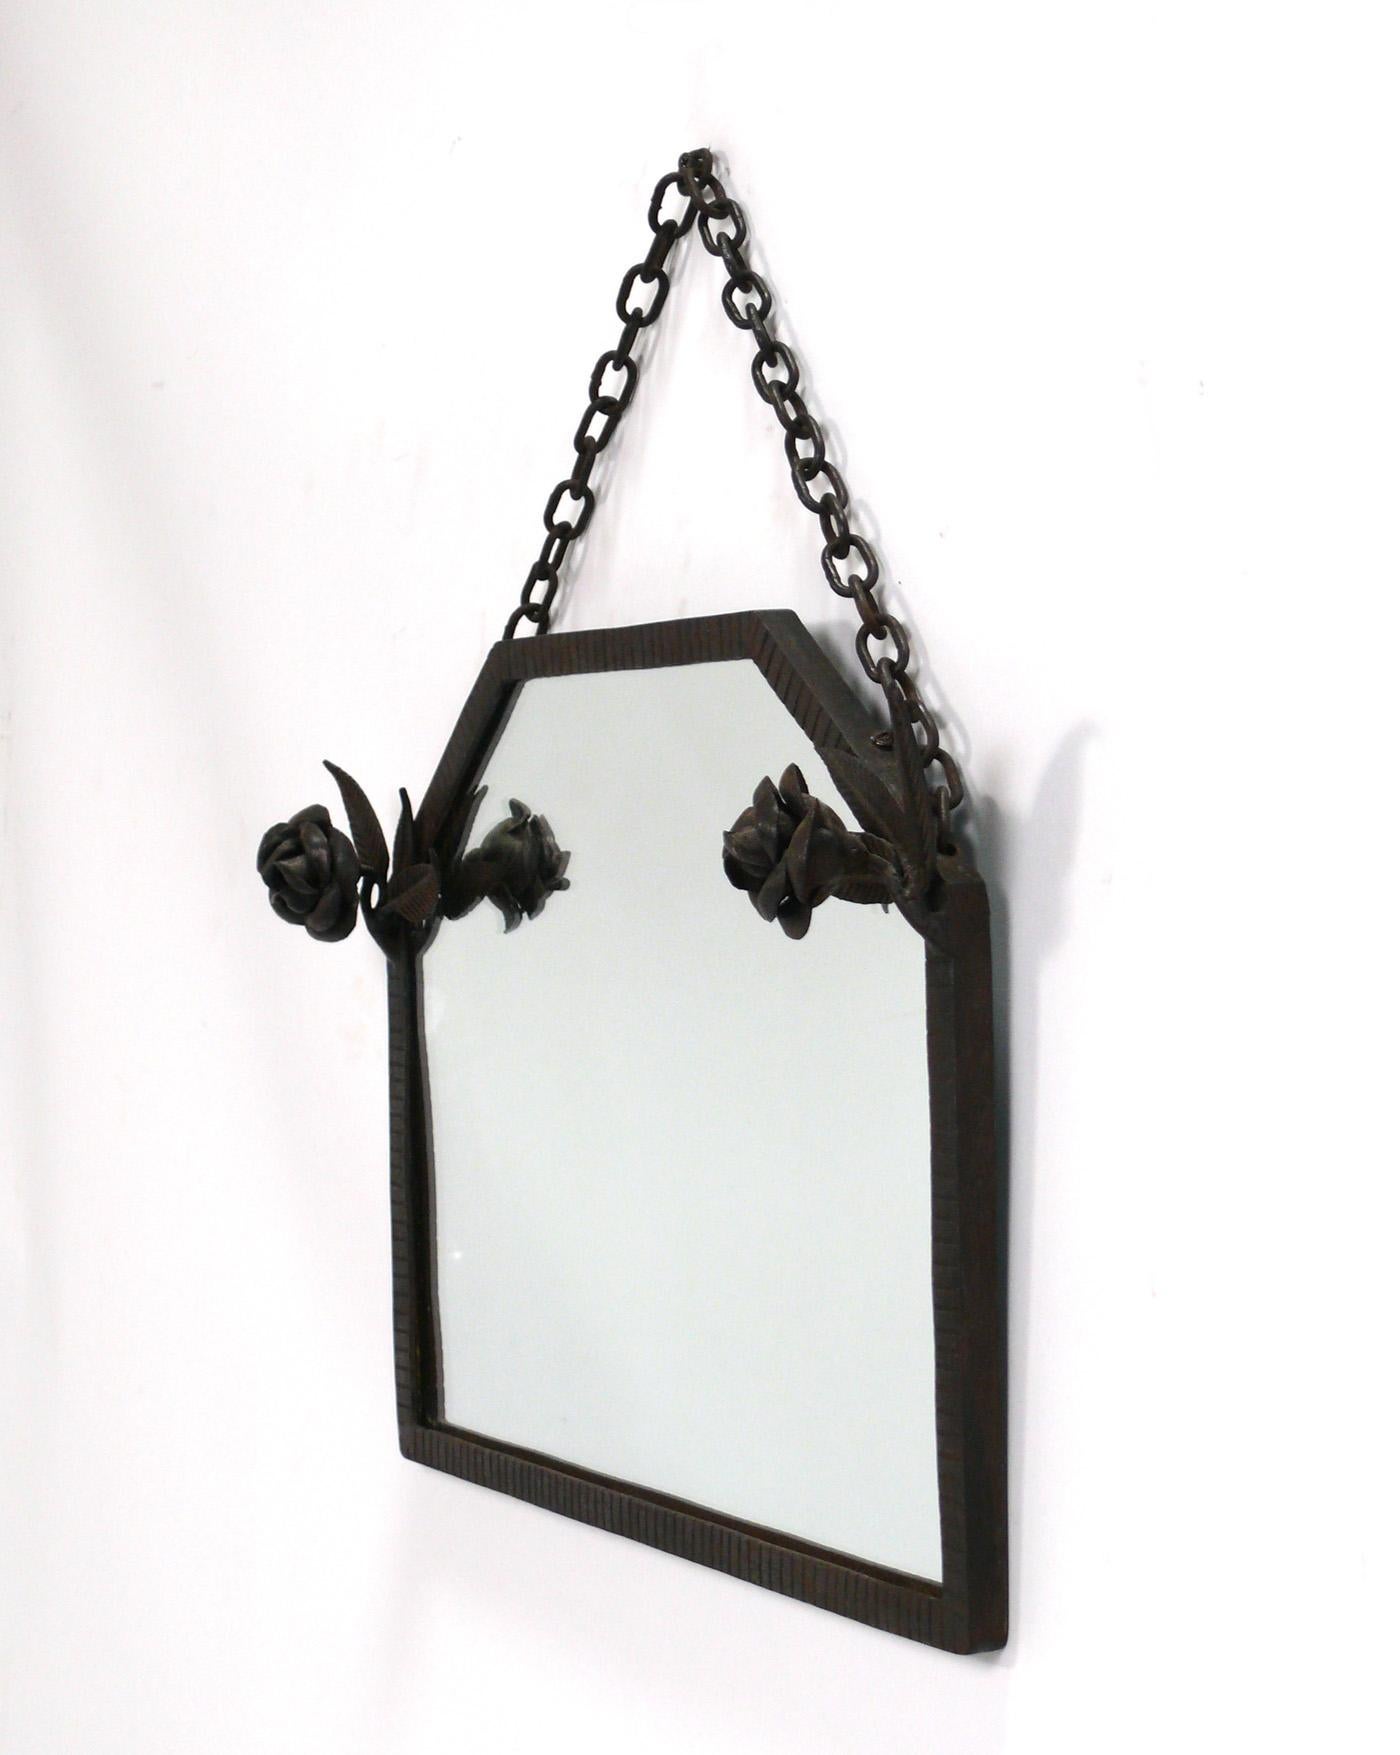 Elegant French Art Deco hand made iron mirror, France, circa 1930s. Beautiful hand hammered iron work surmounted with roses. The mirror glass has been replaced at some point.